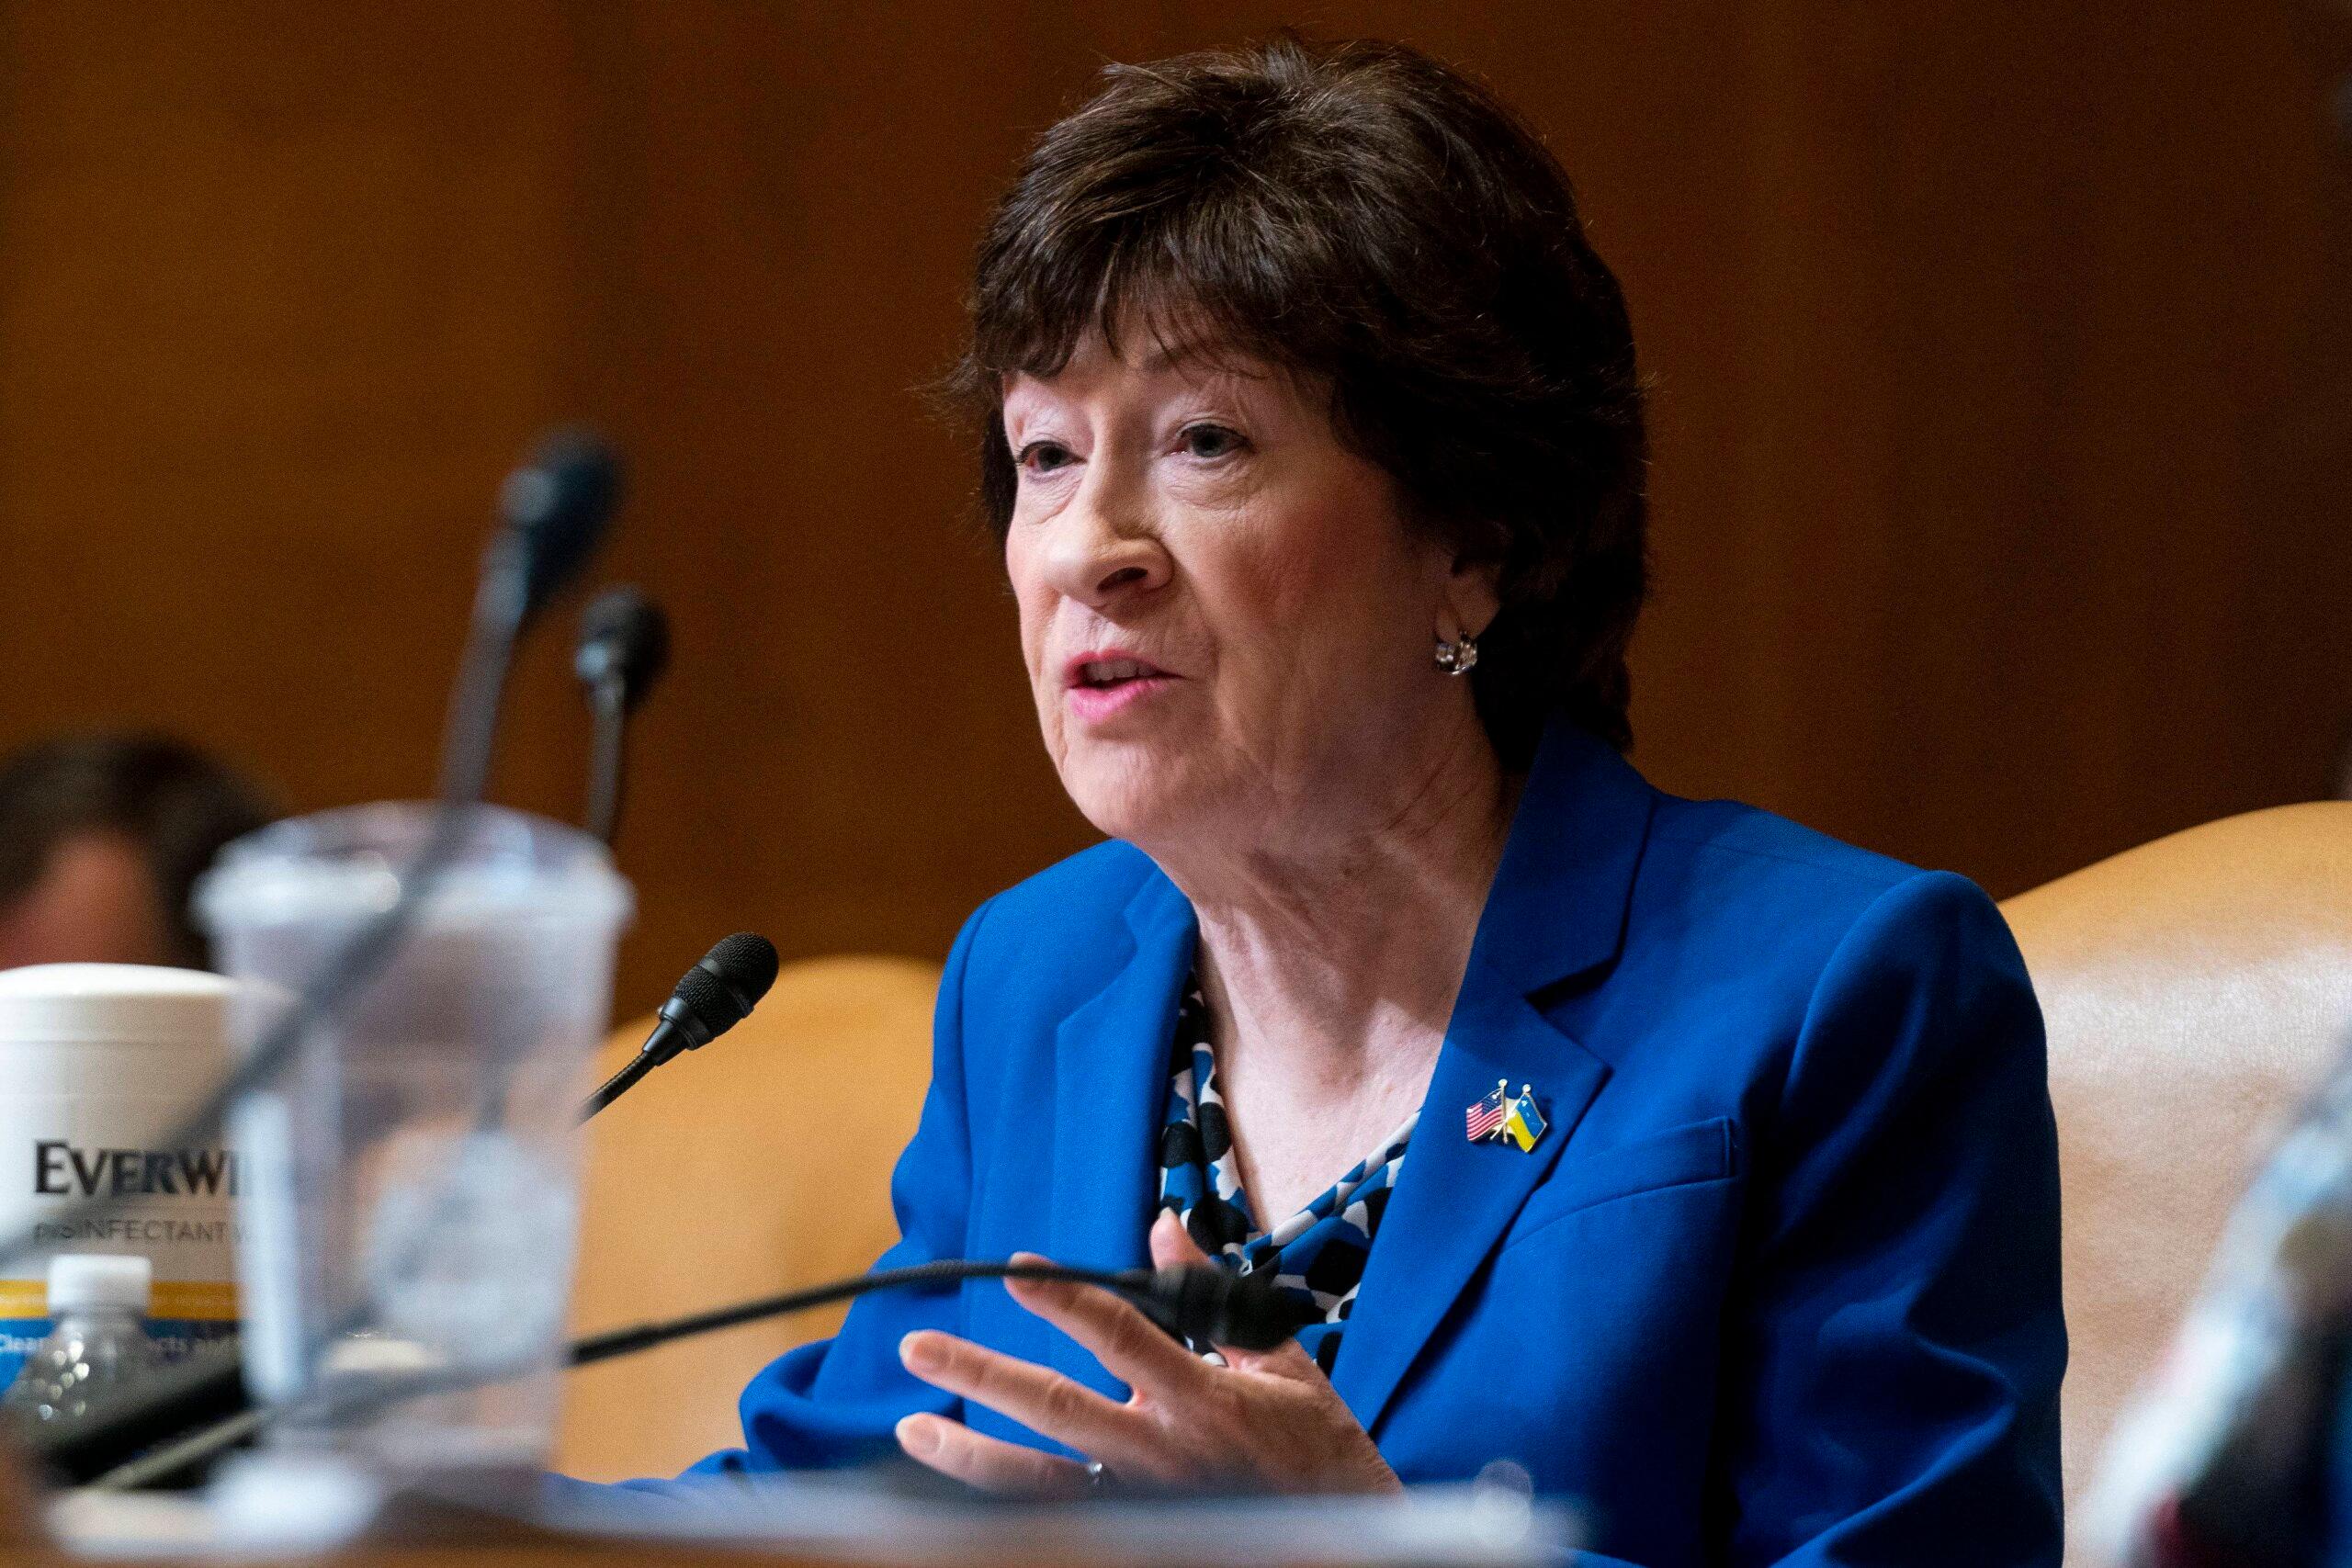 Susan Collins with the US Senate Committee on Appropriations hearing A Review of the Presidents FY 2023 Funding Request and Budget Justification for the US Department of Justice